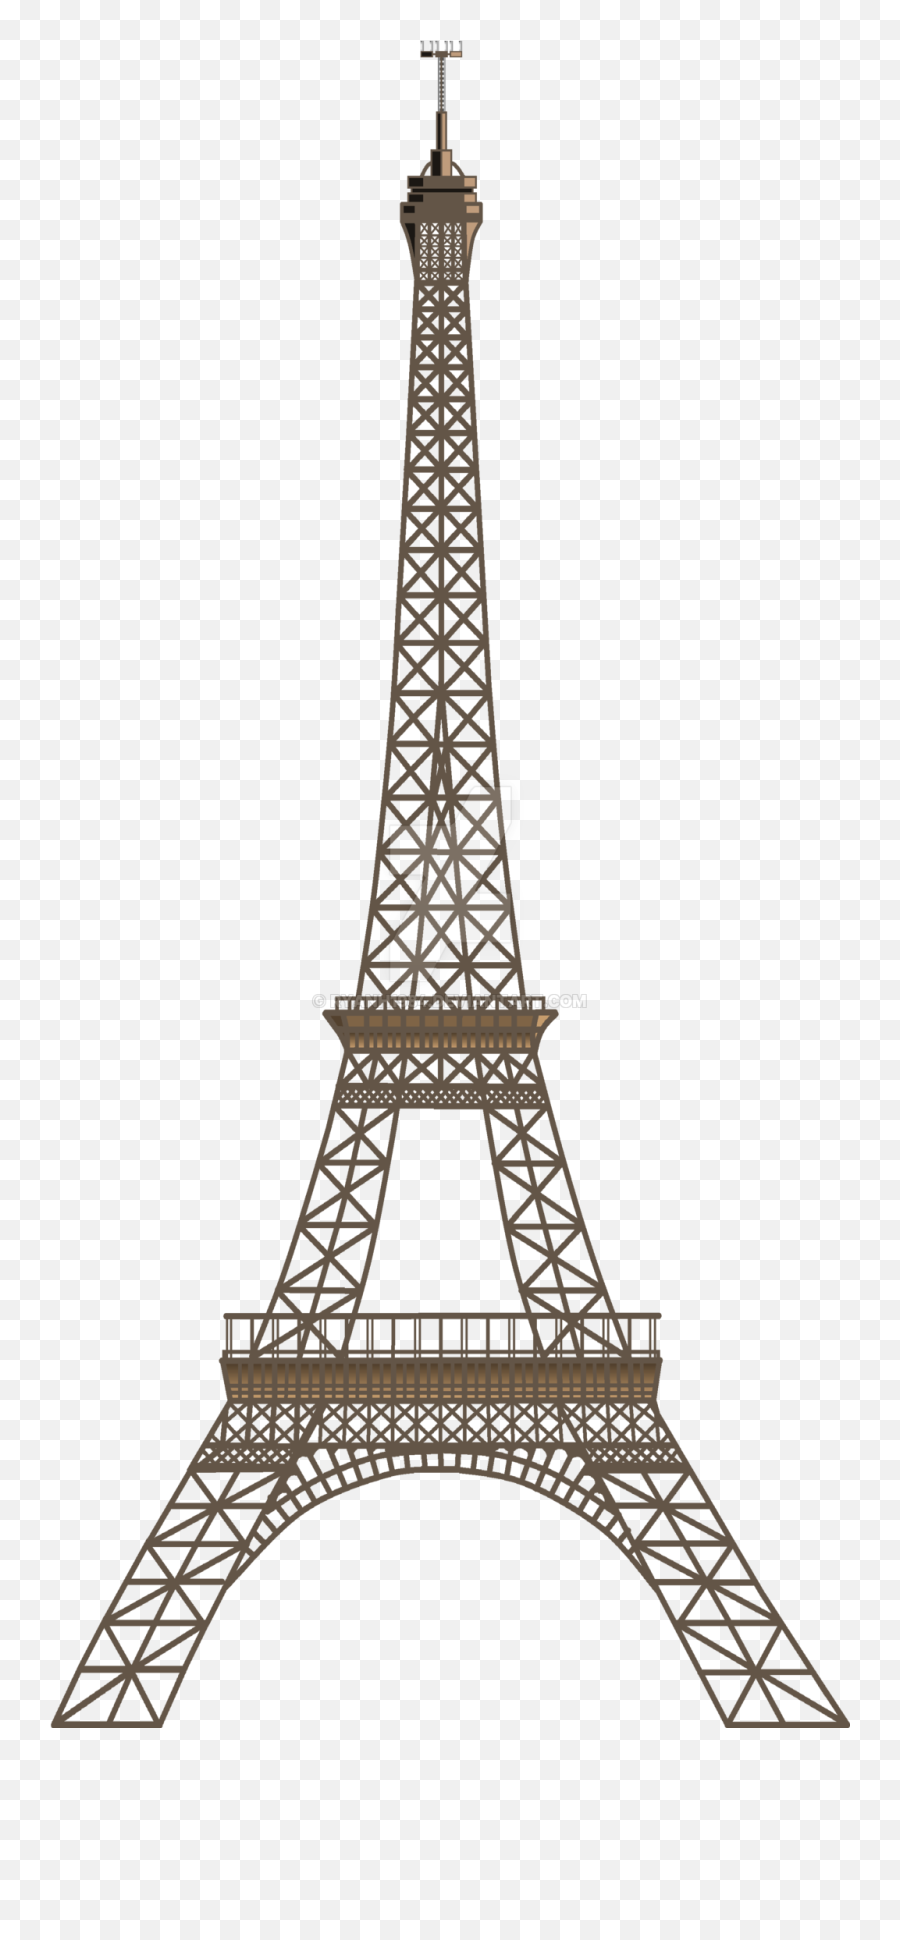 Eiffel Tower Png - Eiffel Tower Emoji,Eiffel Tower Png